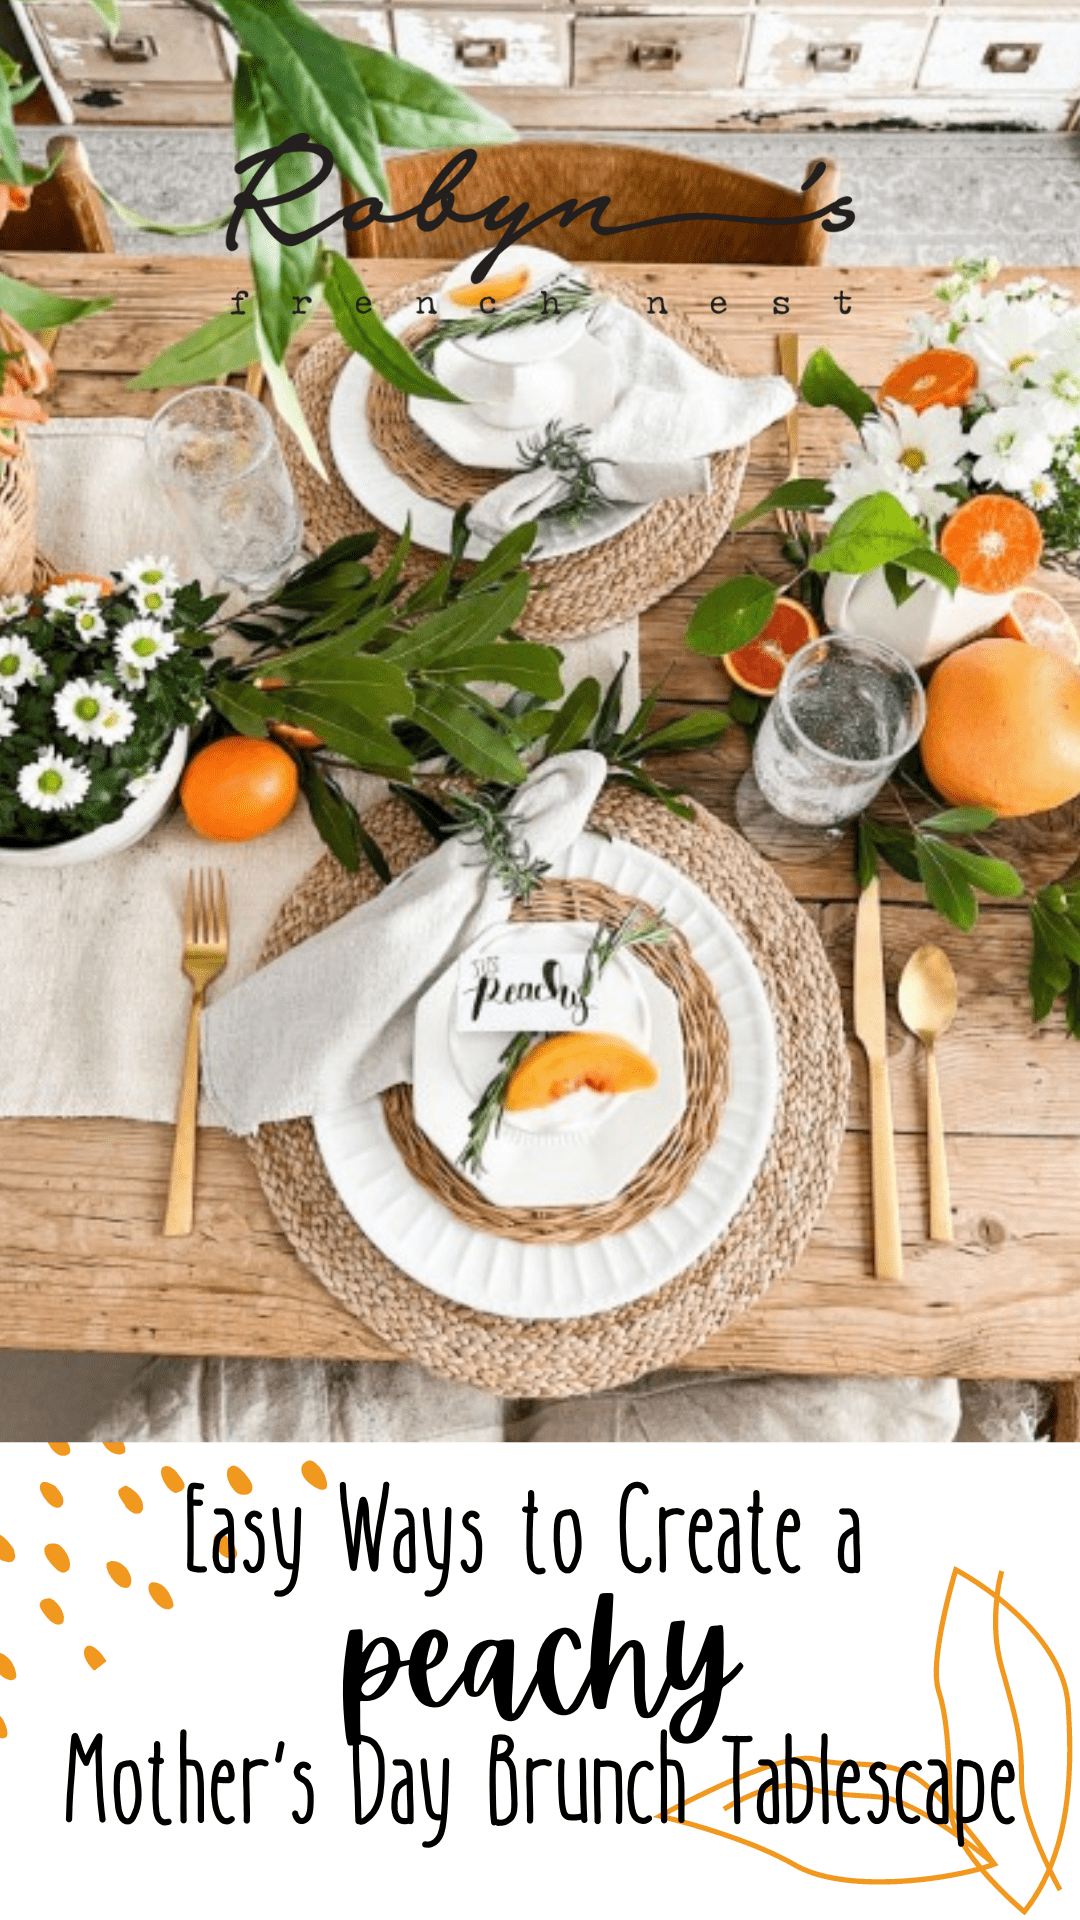 Simple Ideas to Create a “Peachy” Mother’s Day Brunch Tablescape